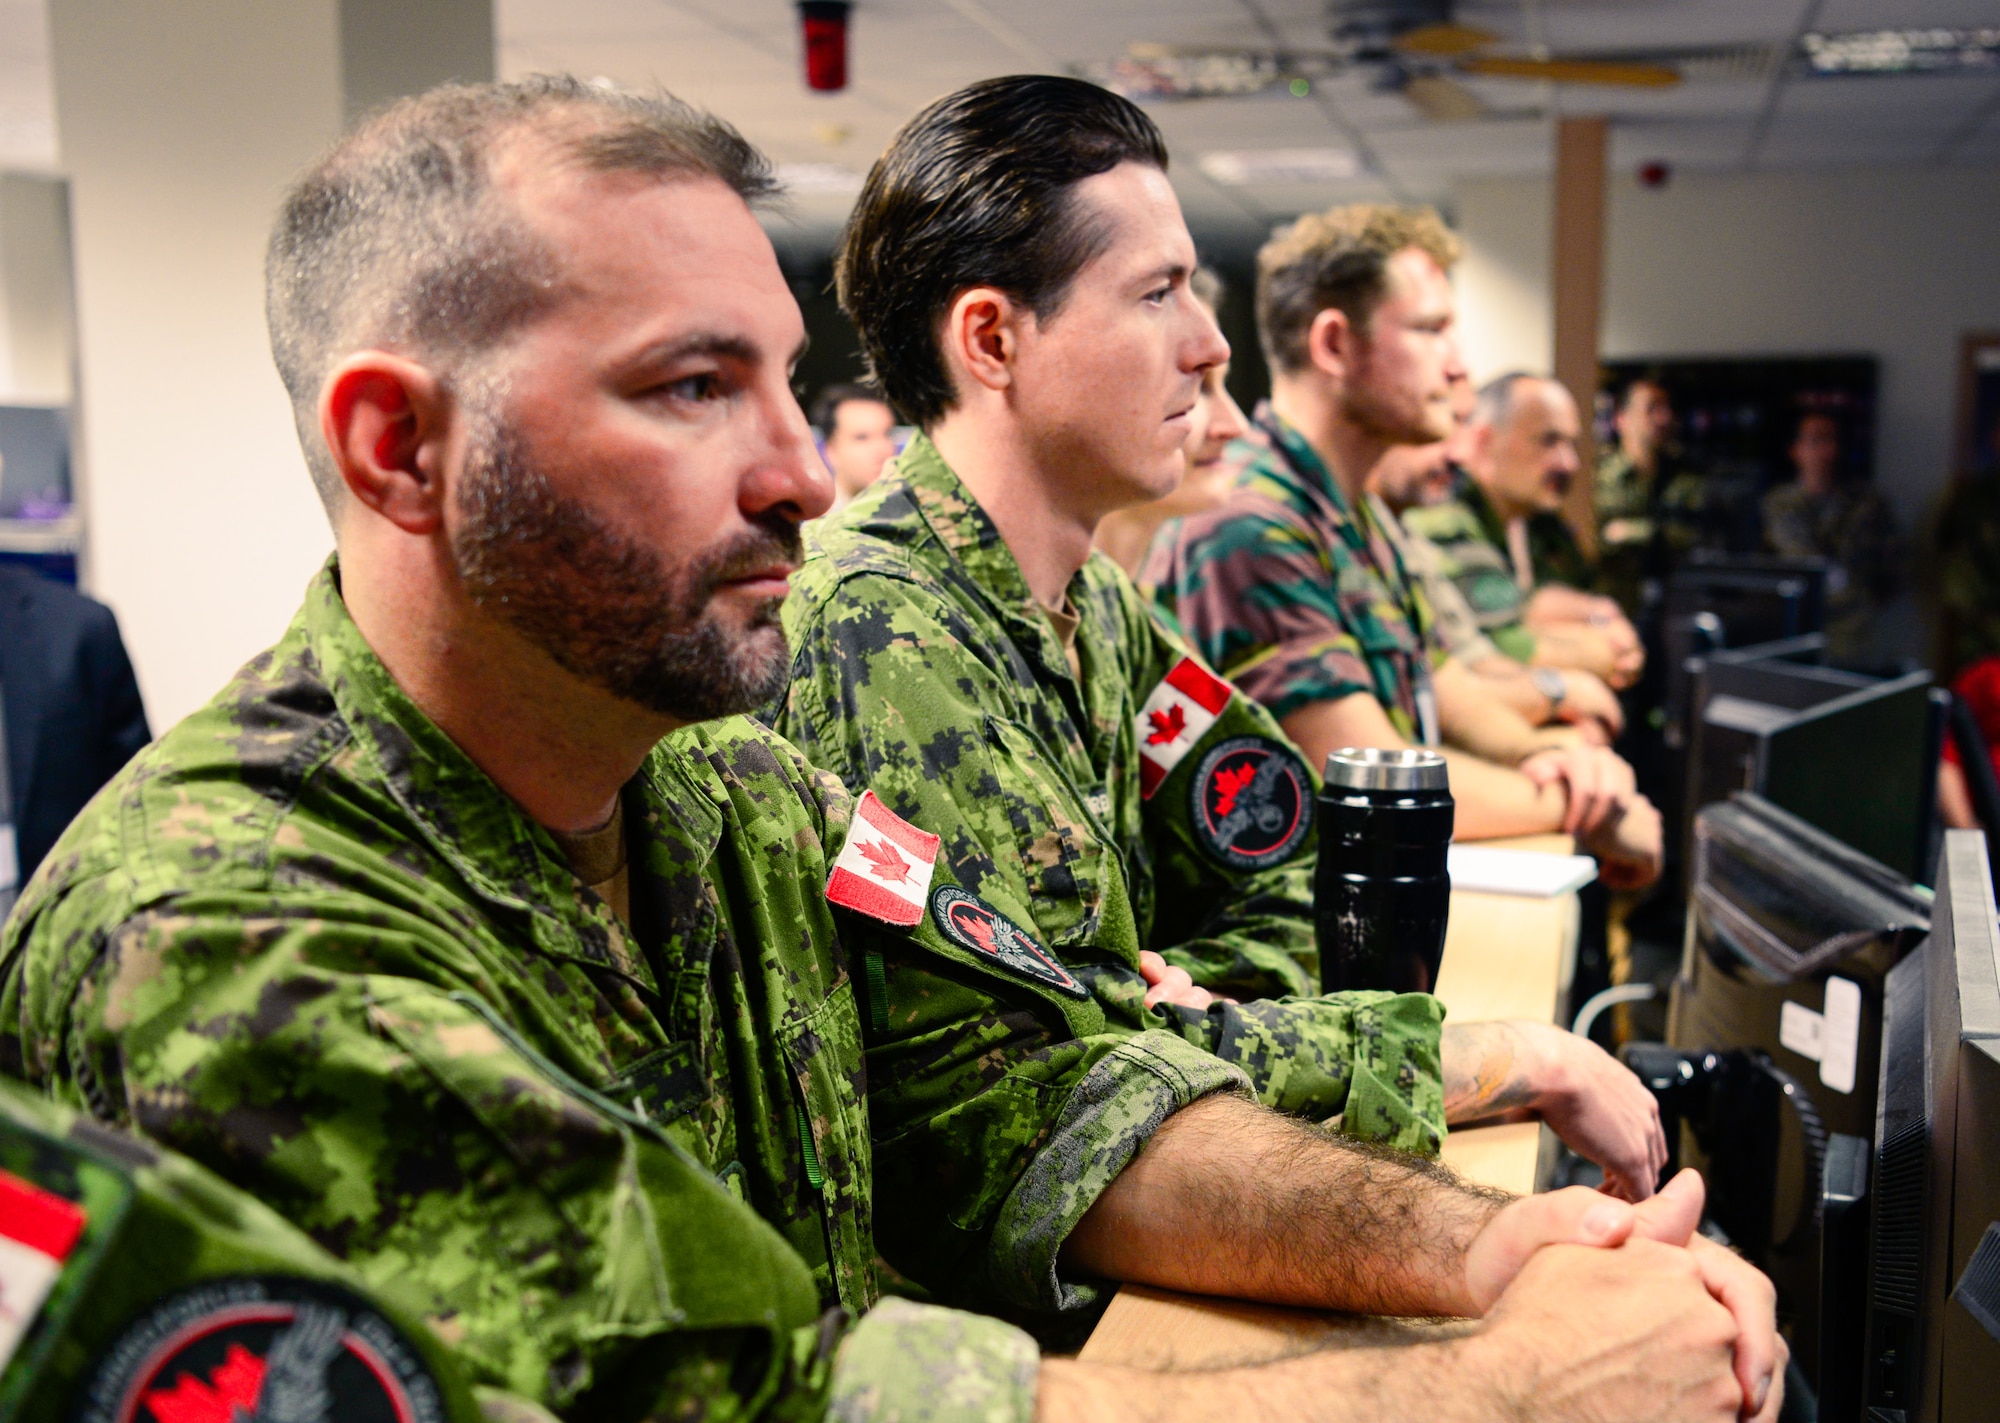 Royal Canadian Air Force airmen attend a briefing at the European Partnership Integration Enterprise during exercise Unified Vision 2023 at Ramstein Air Base, Germany, June 22, 2023. NATO allies and partners routinely serve together, both operationally and during exercises, enhancing relationships in the alliance, ensuring timely and coordinated responses in peacetime and crises.